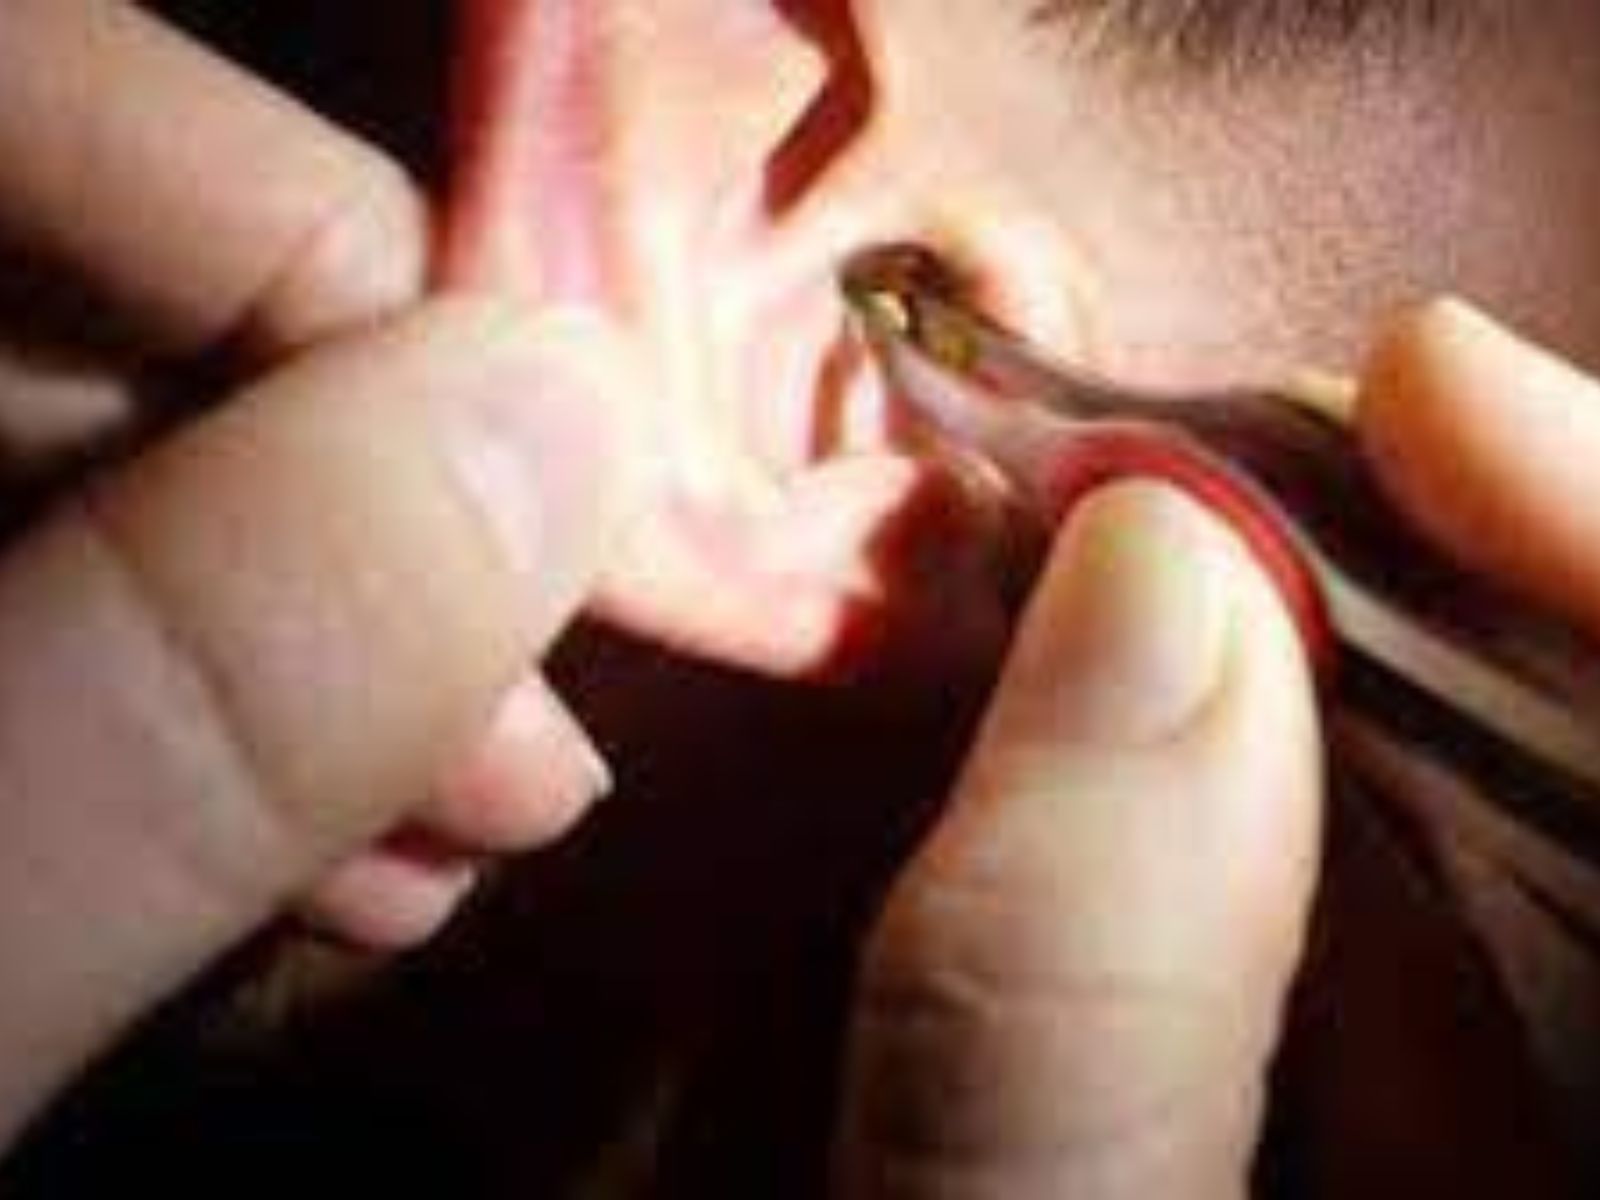 Manual Ear Wax removal for patient from Eastwood